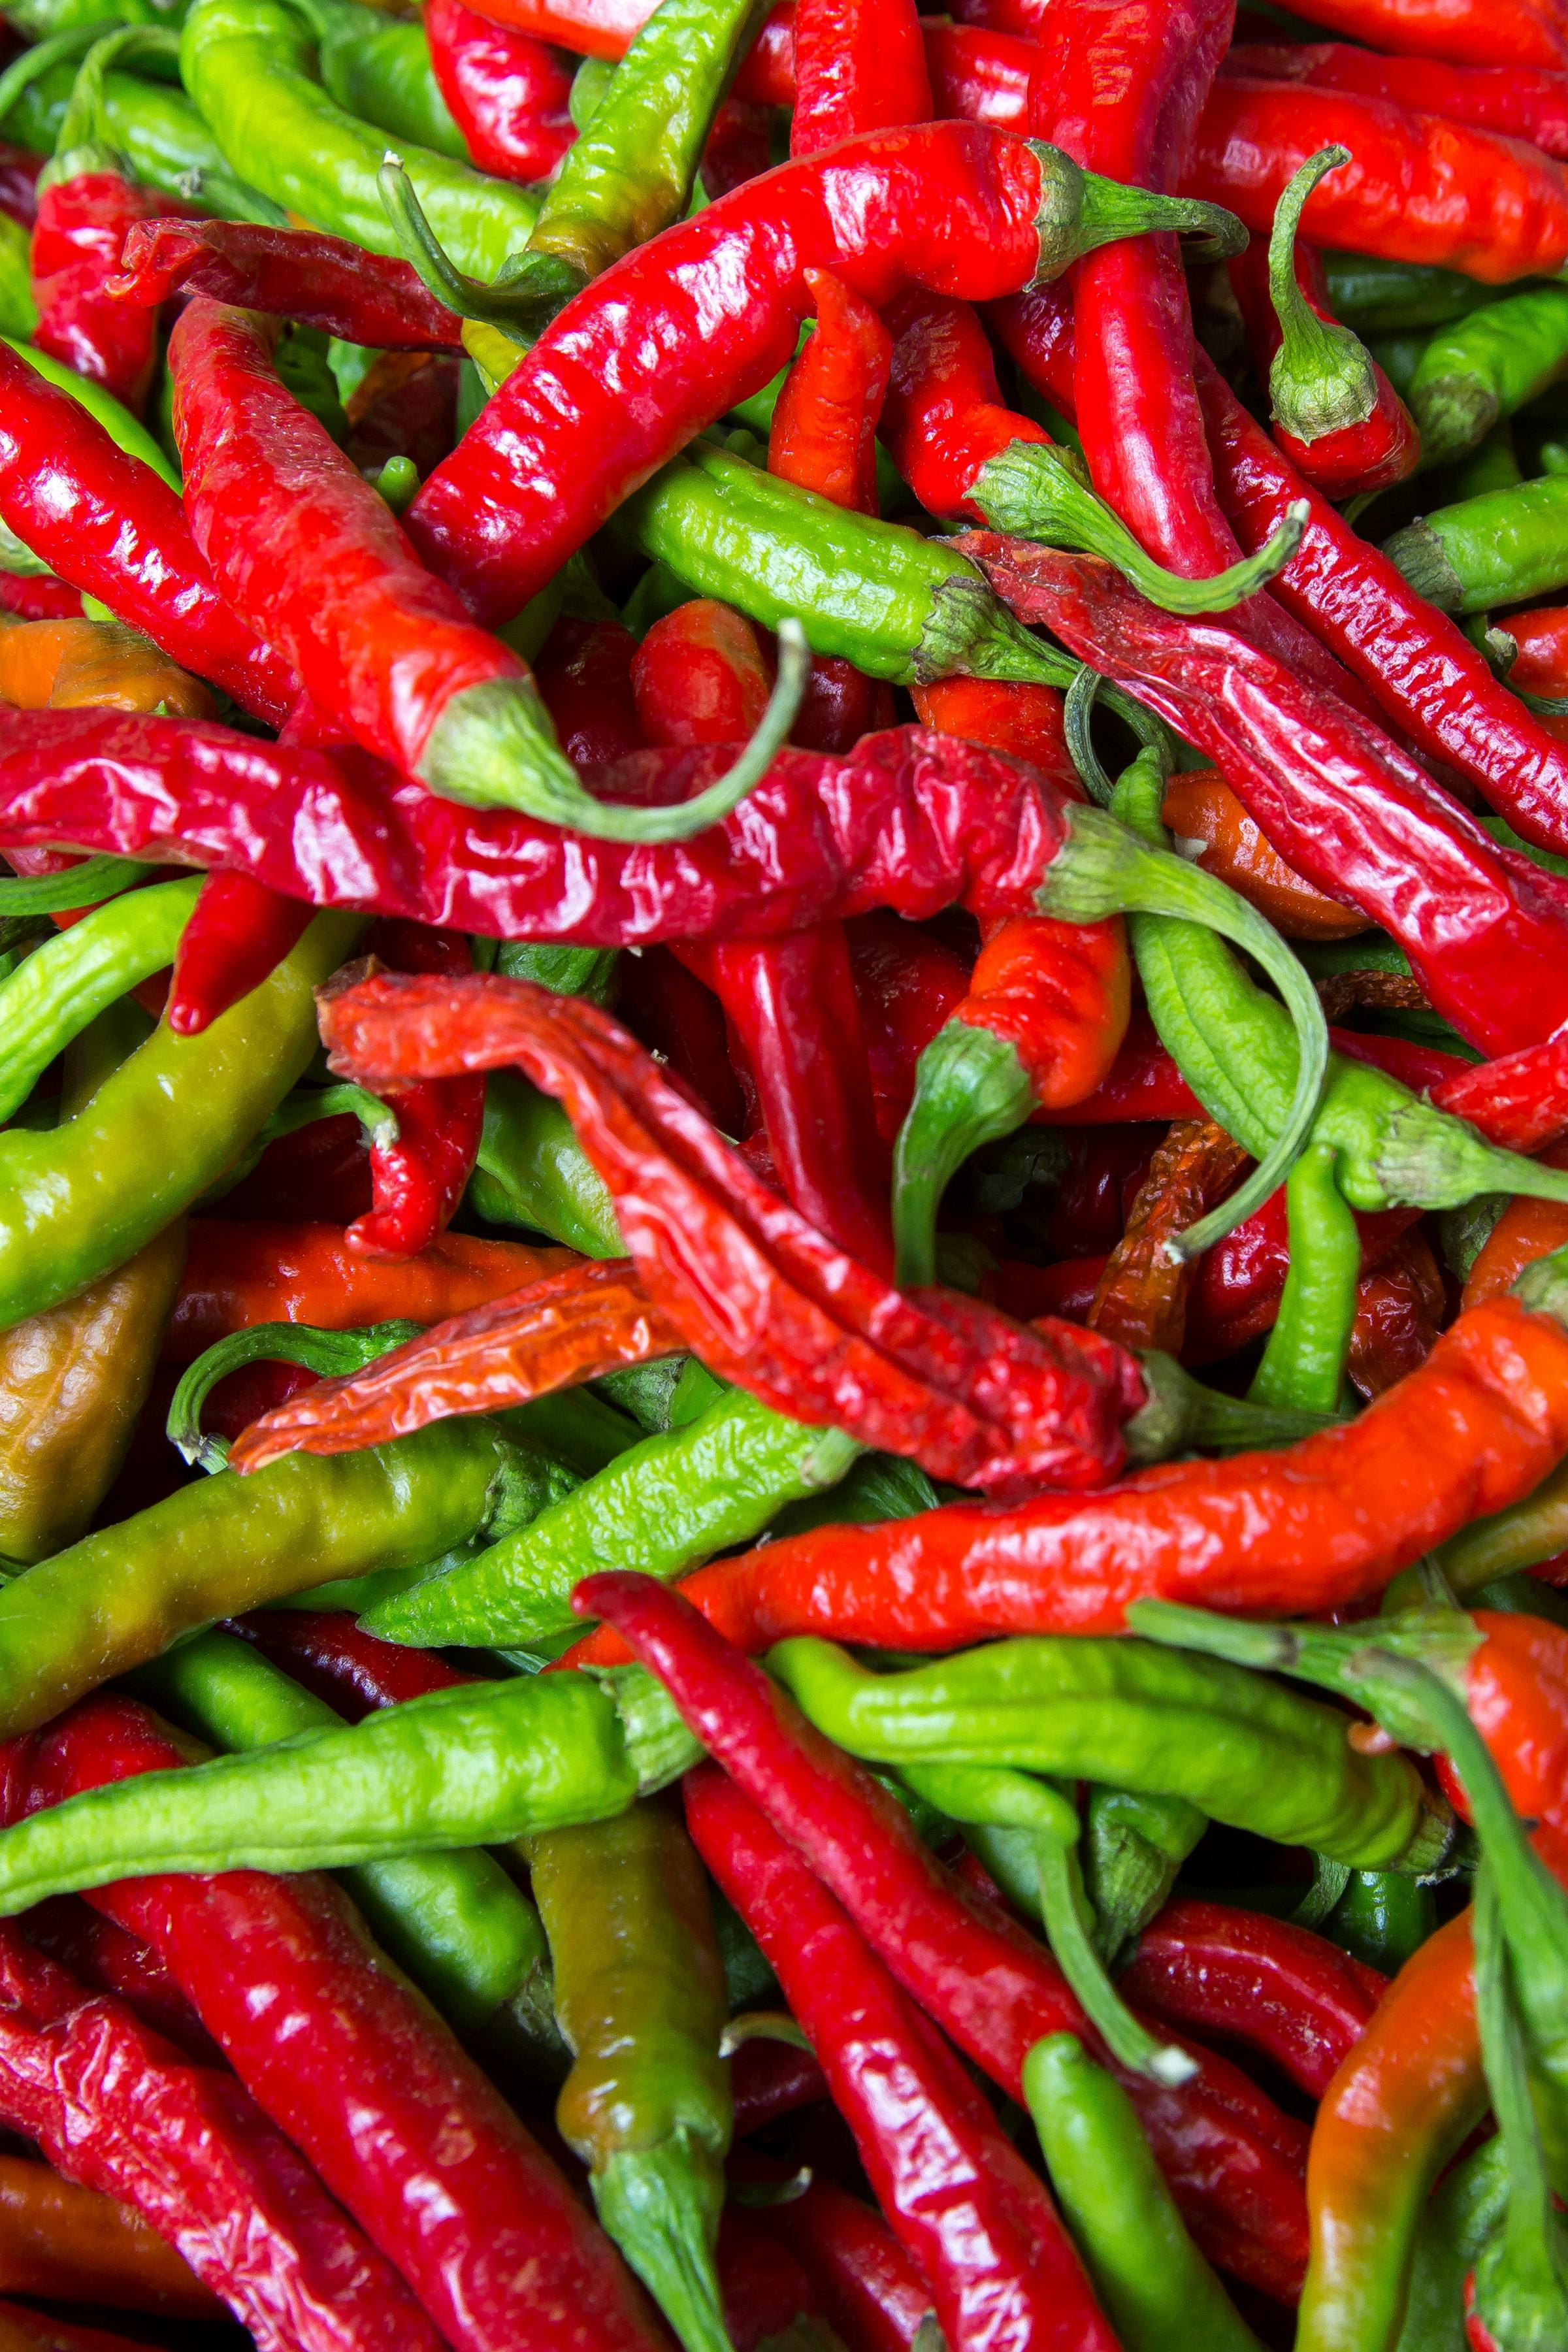 Red and green chili peppers - Photo by Mark Stebnicki: https://www.pexels.com/photo/pile-of-red-and-green-chili-peppers-2893882/